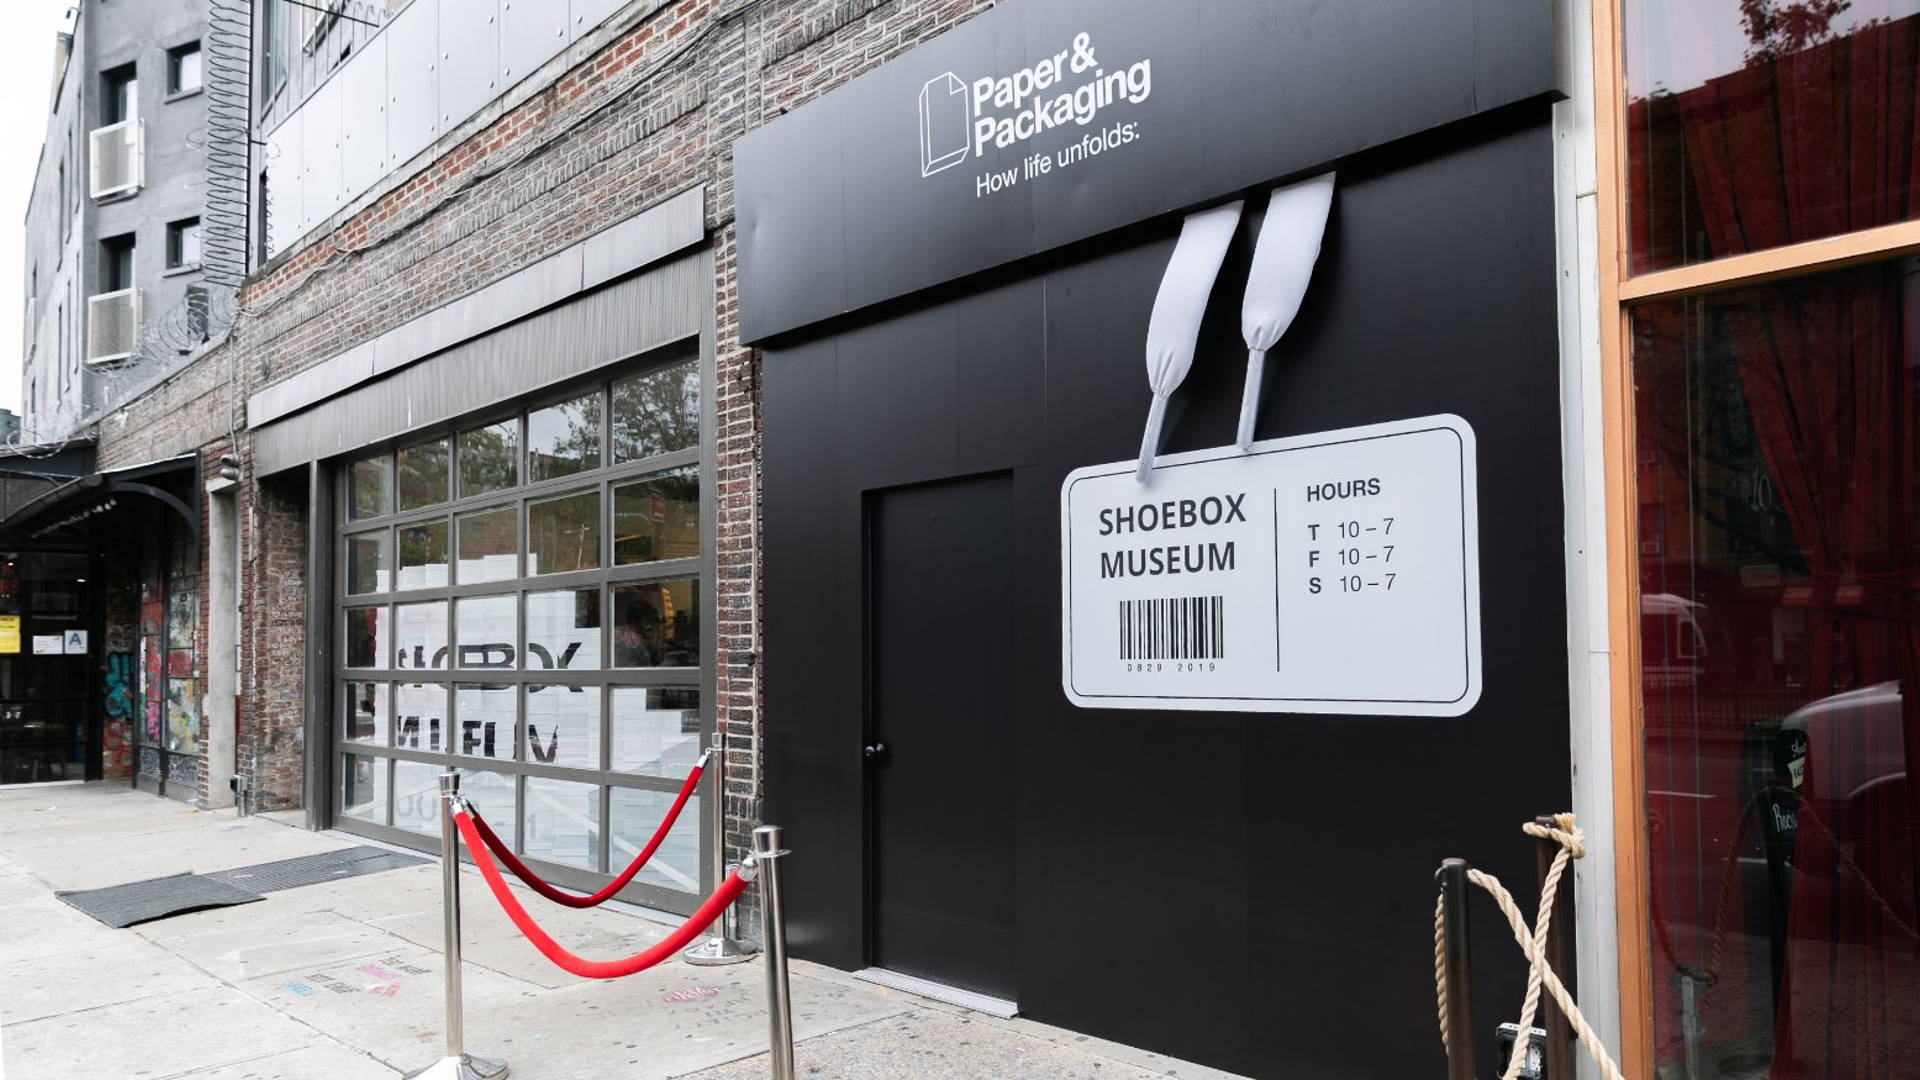 Featured image for The Shoebox Museum Celebrates Sneakerhead Packaging